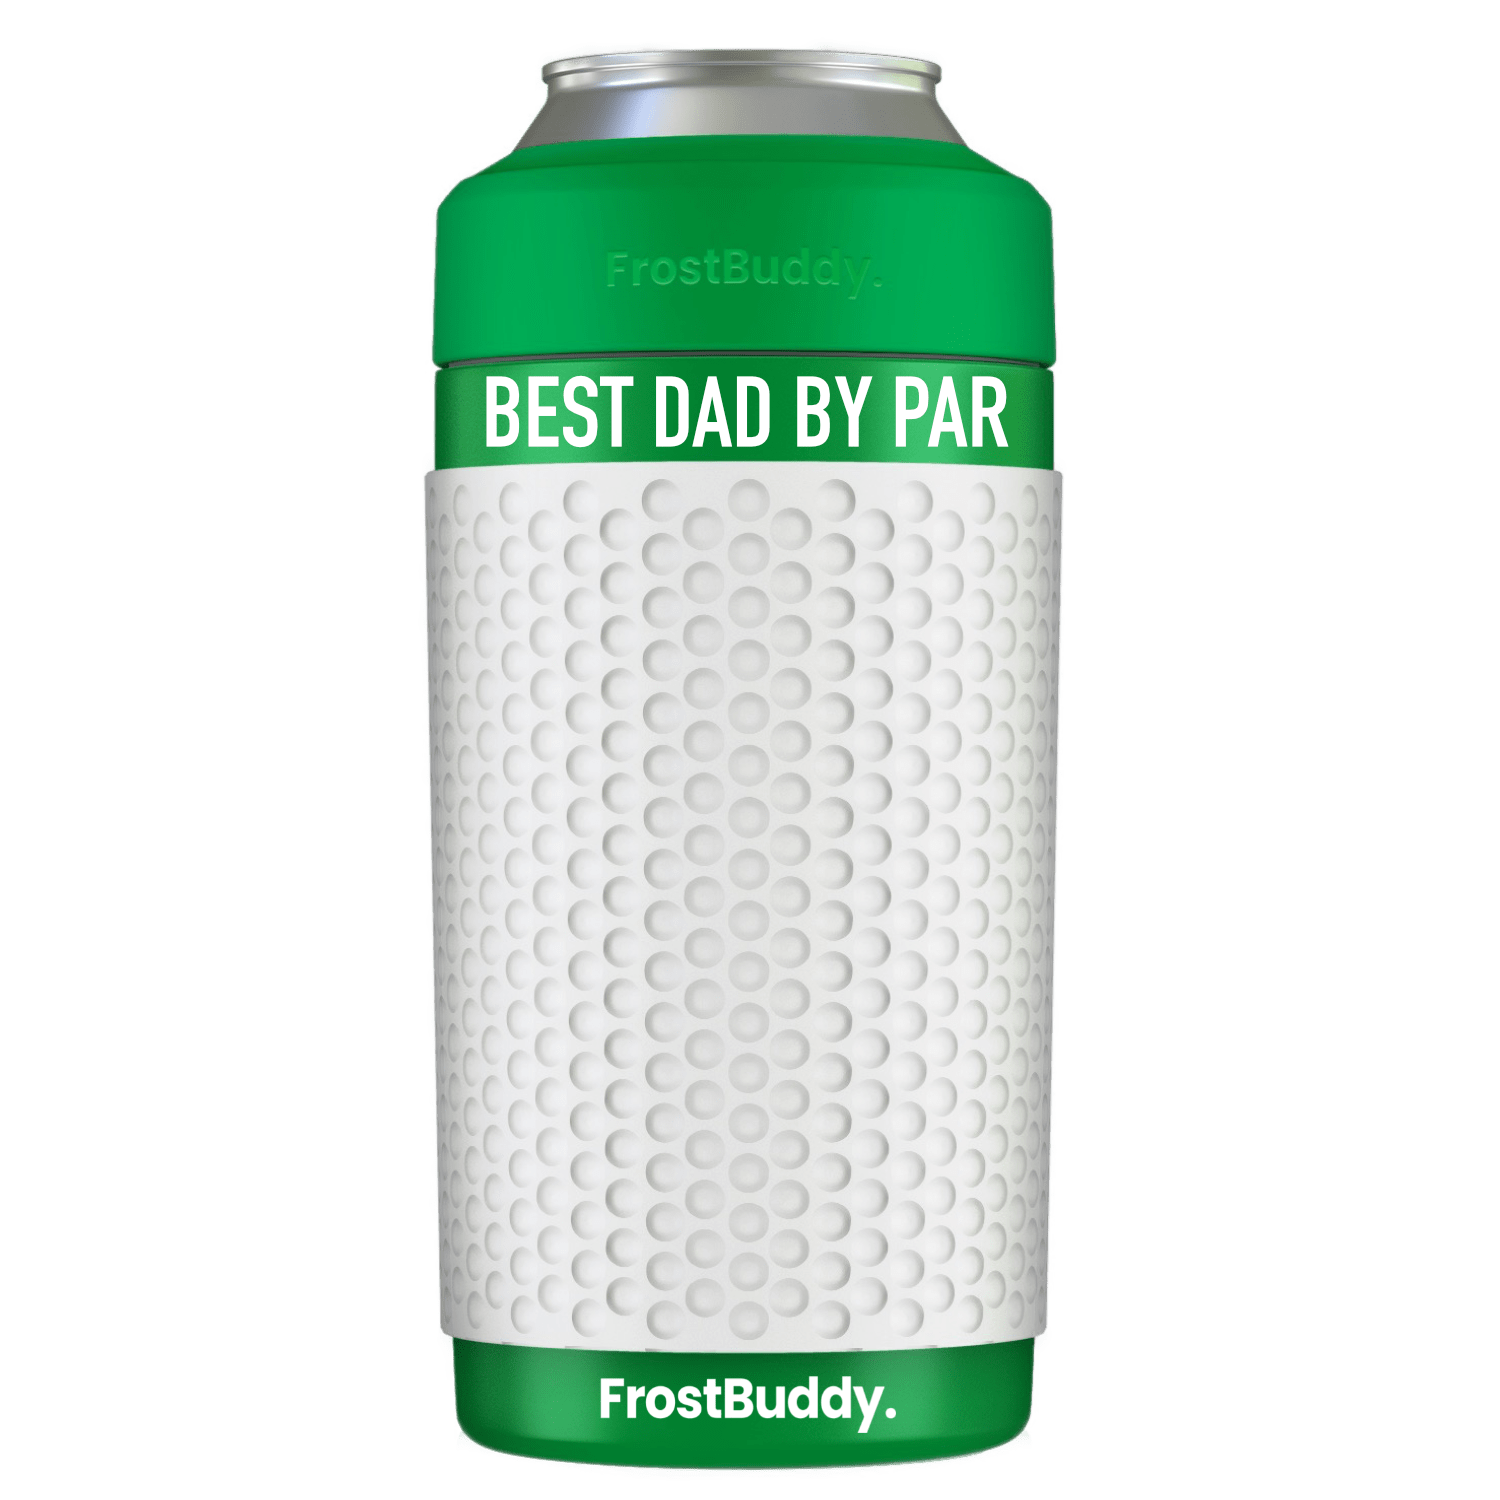 https://cdn.shopify.com/s/files/1/0294/5453/2743/products/frost-buddy-universal-buddy-2-0-golf-34940216934555.png?v=1668454016&width=1500